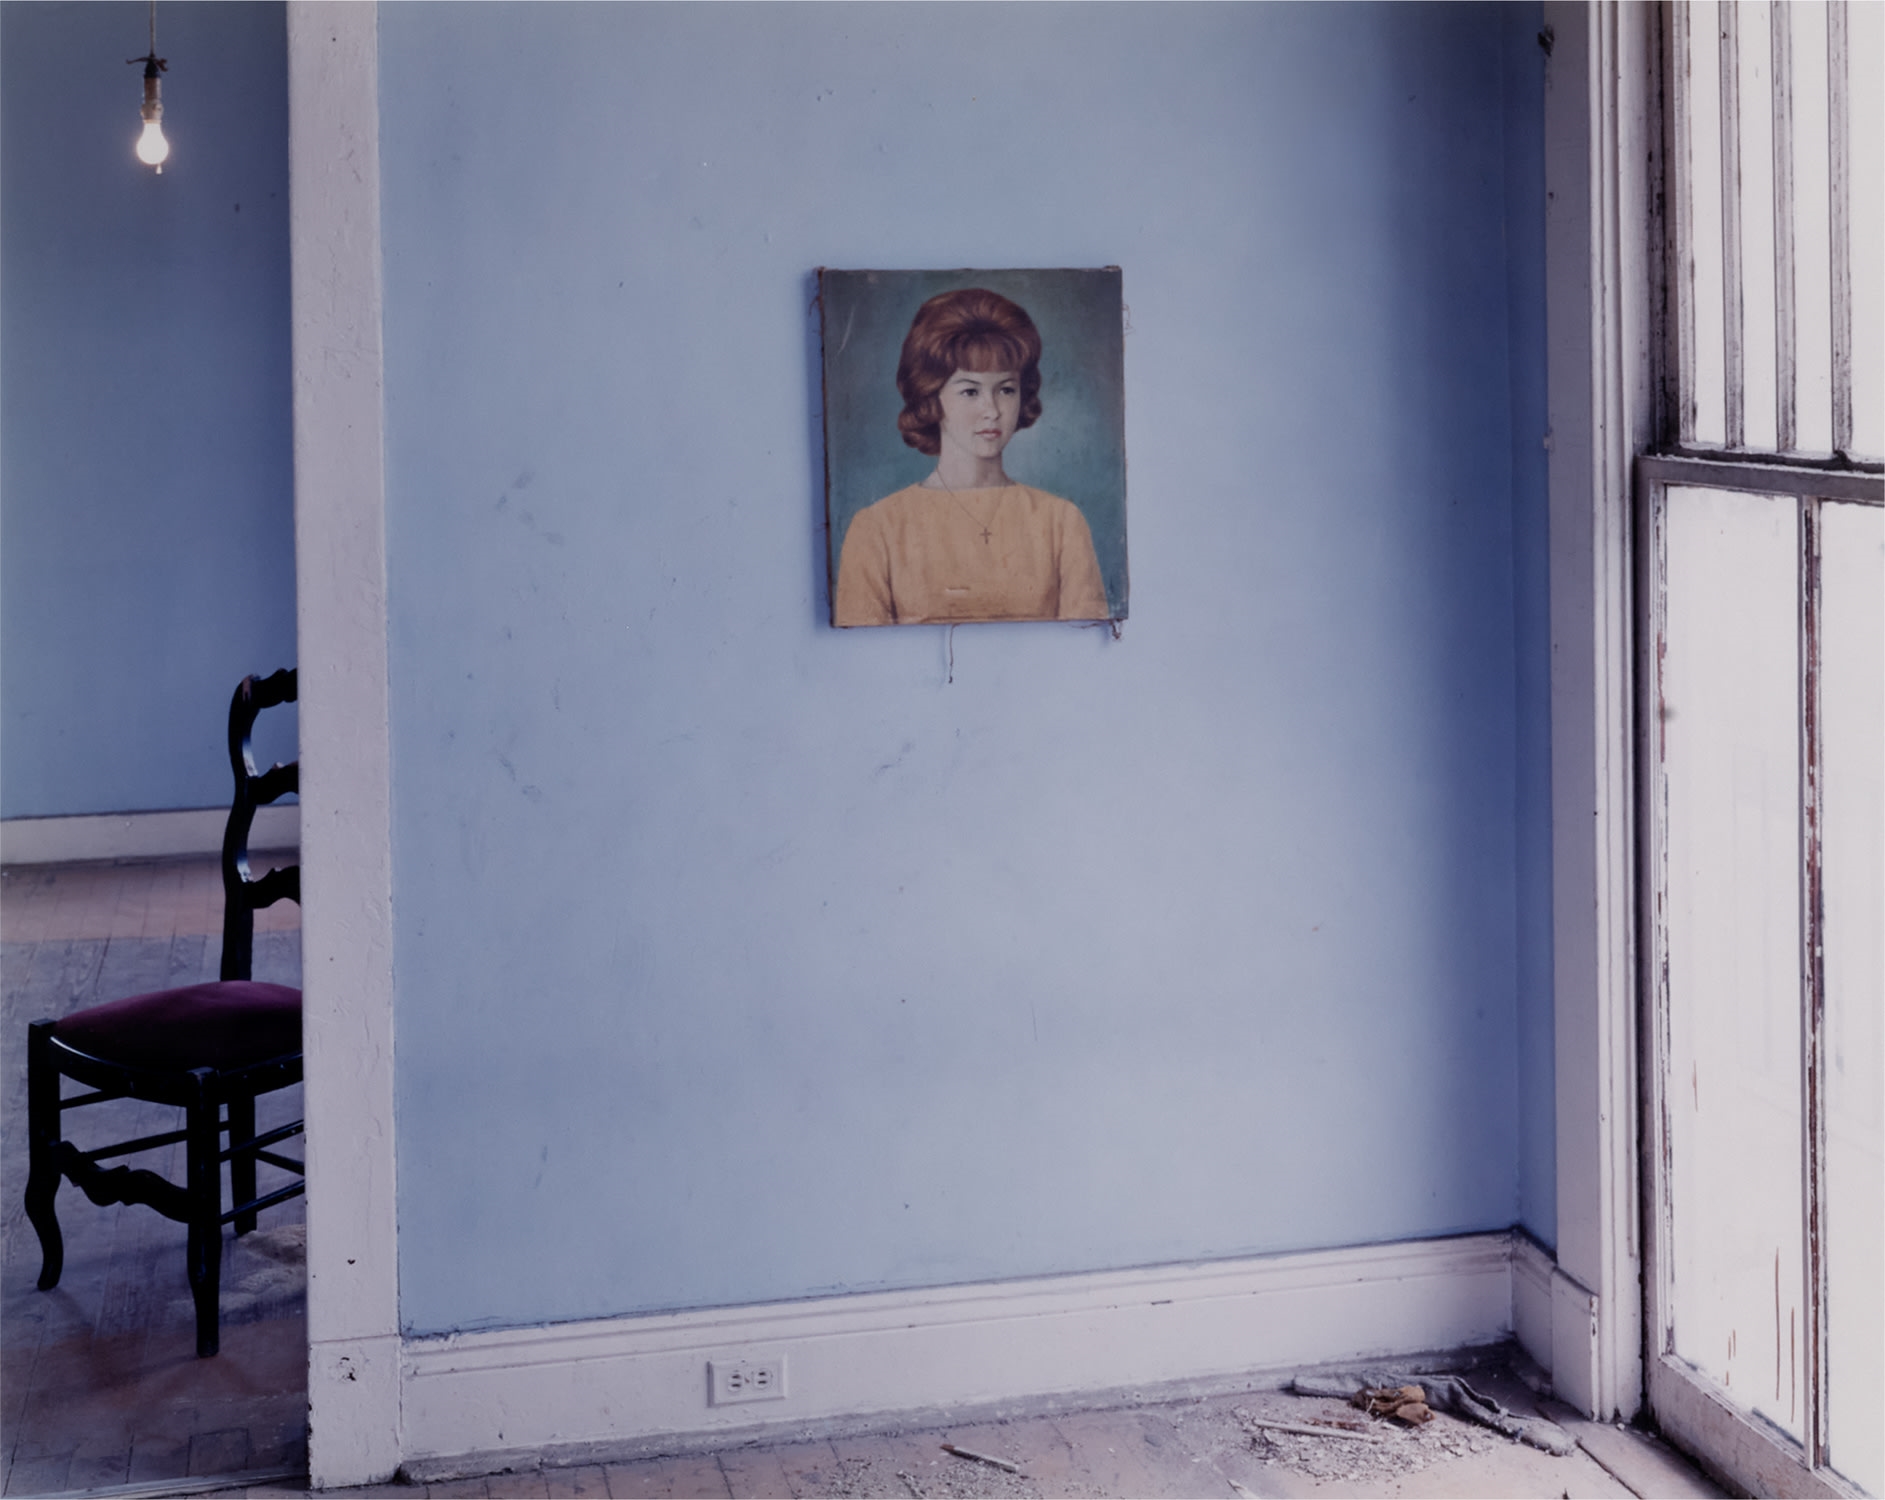 New Orleans, Louisiana by Alec Soth, 2002